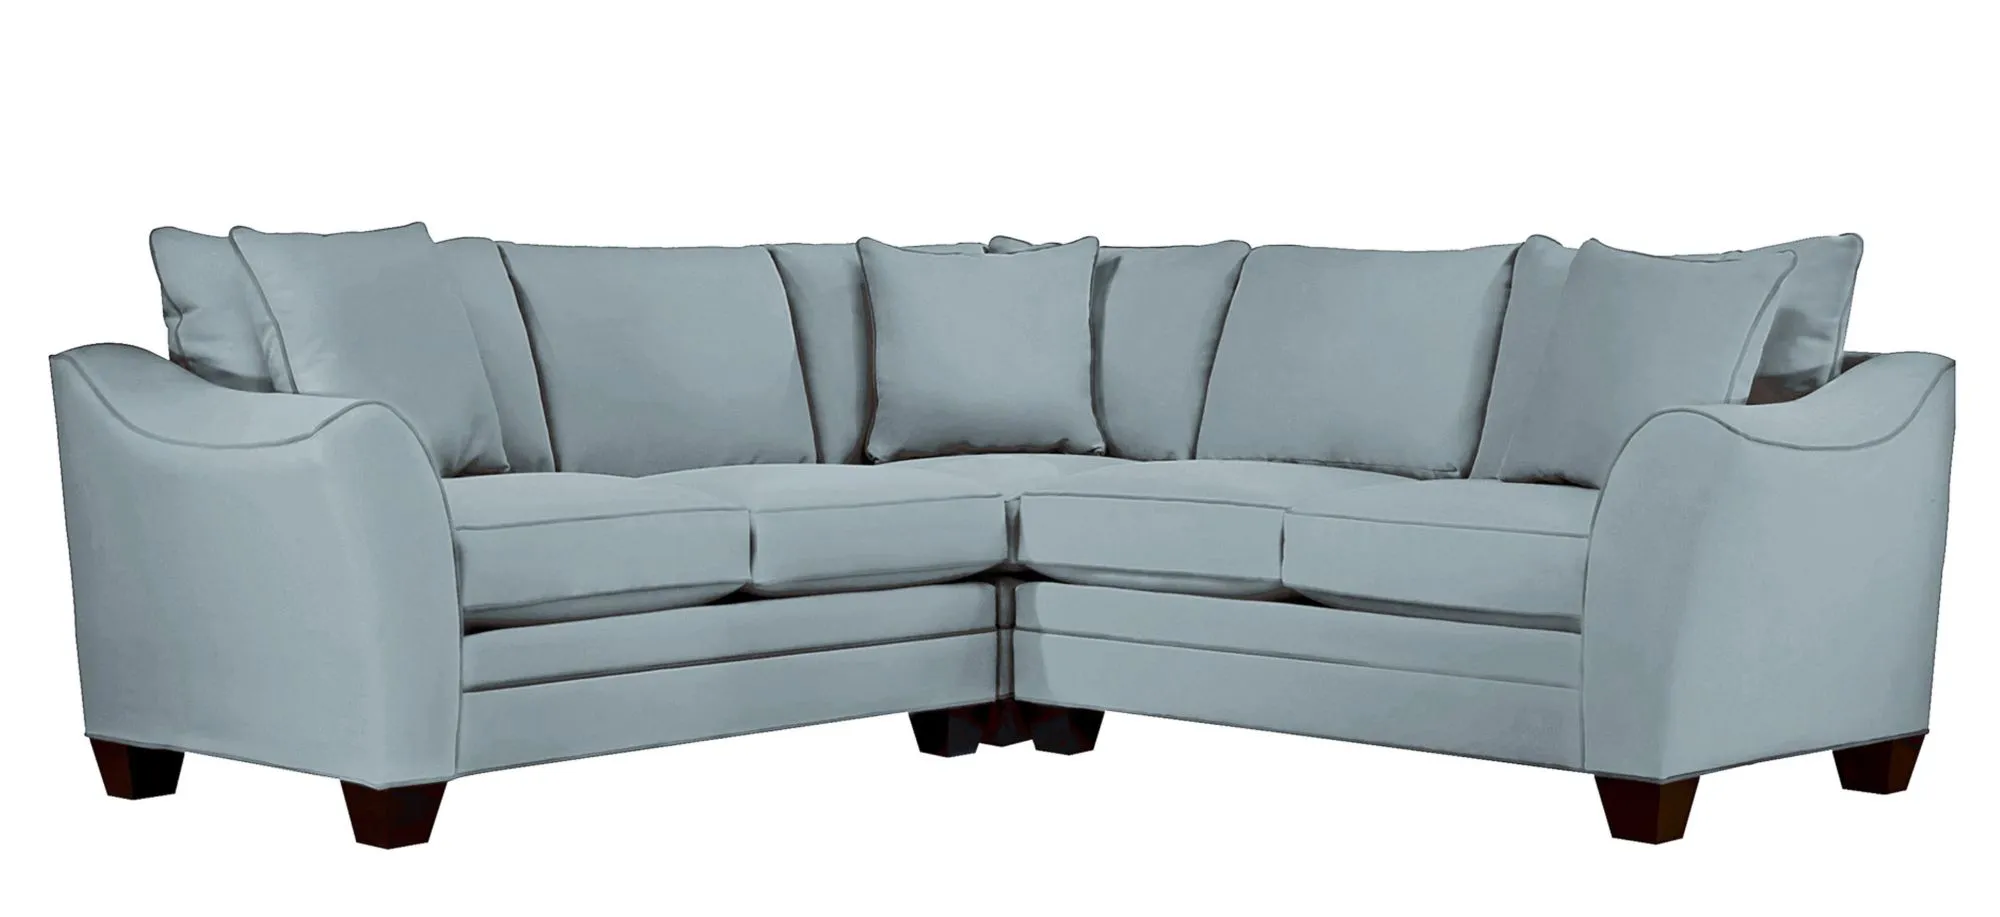 Foresthill 3-pc. Symmetrical Loveseat Sectional Sofa in Suede So Soft Hydra by H.M. Richards